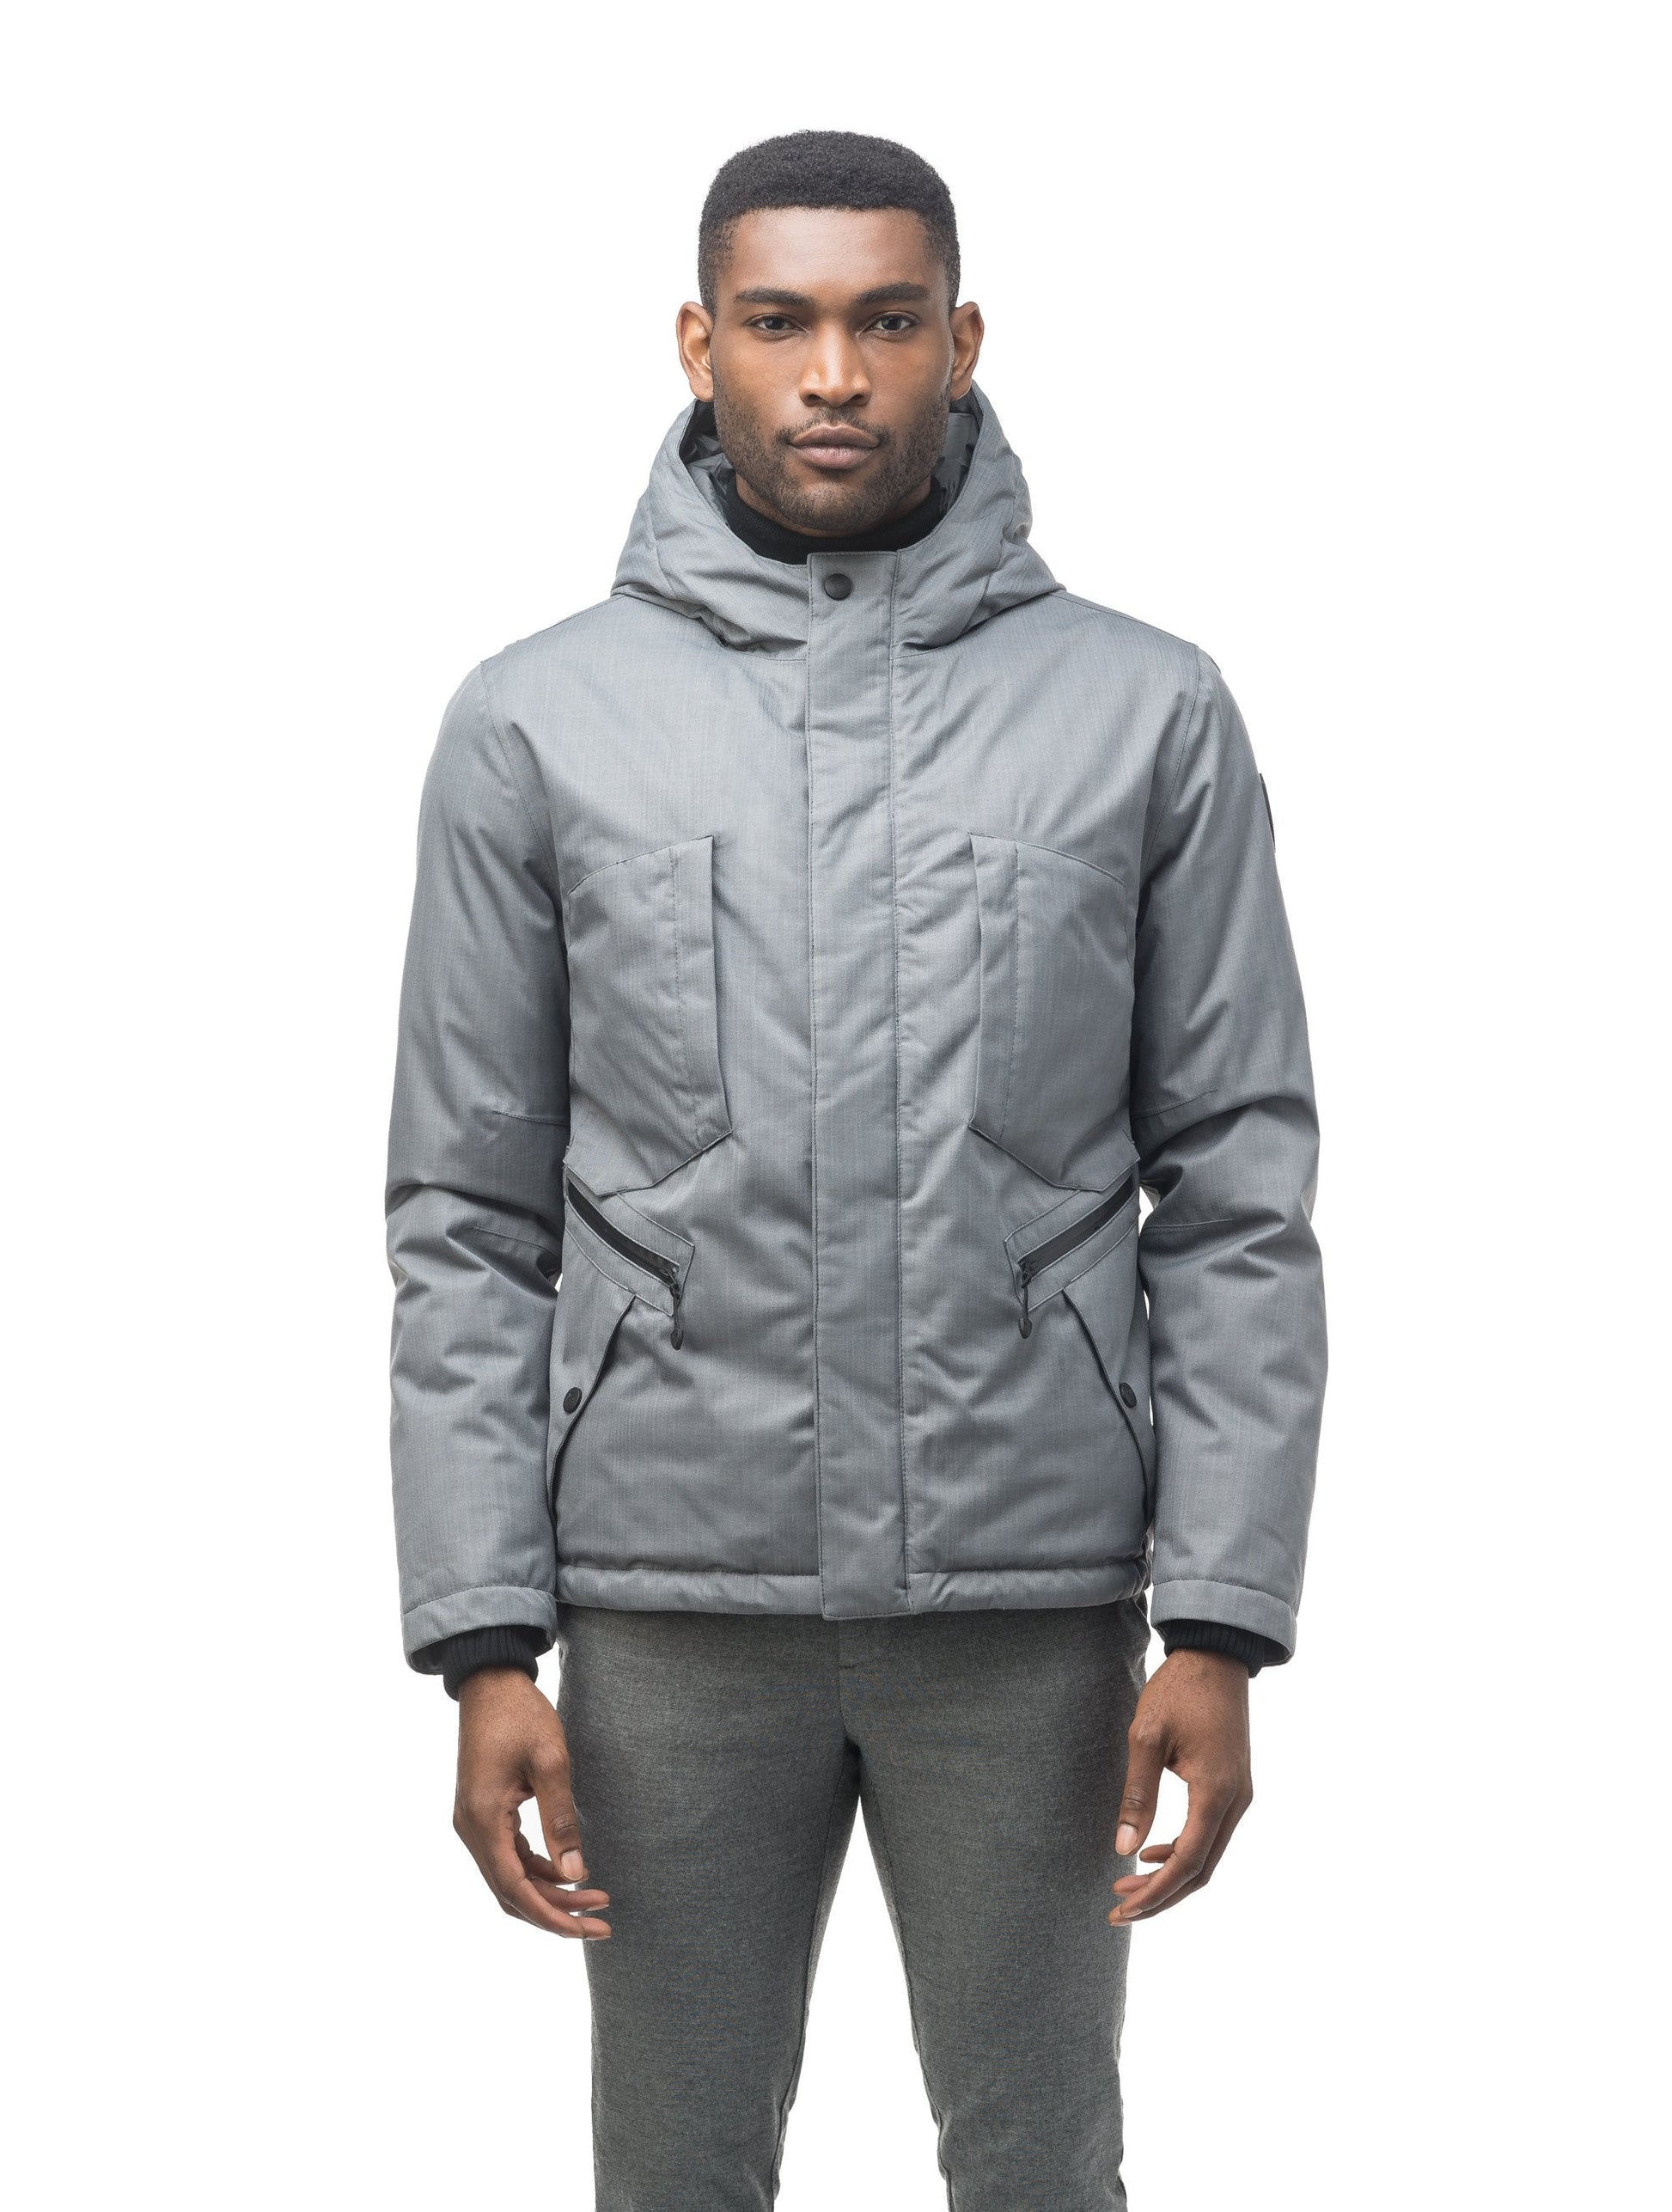 Men's waist length light down coat equipped with six exterior pockets and a hood in Concrete